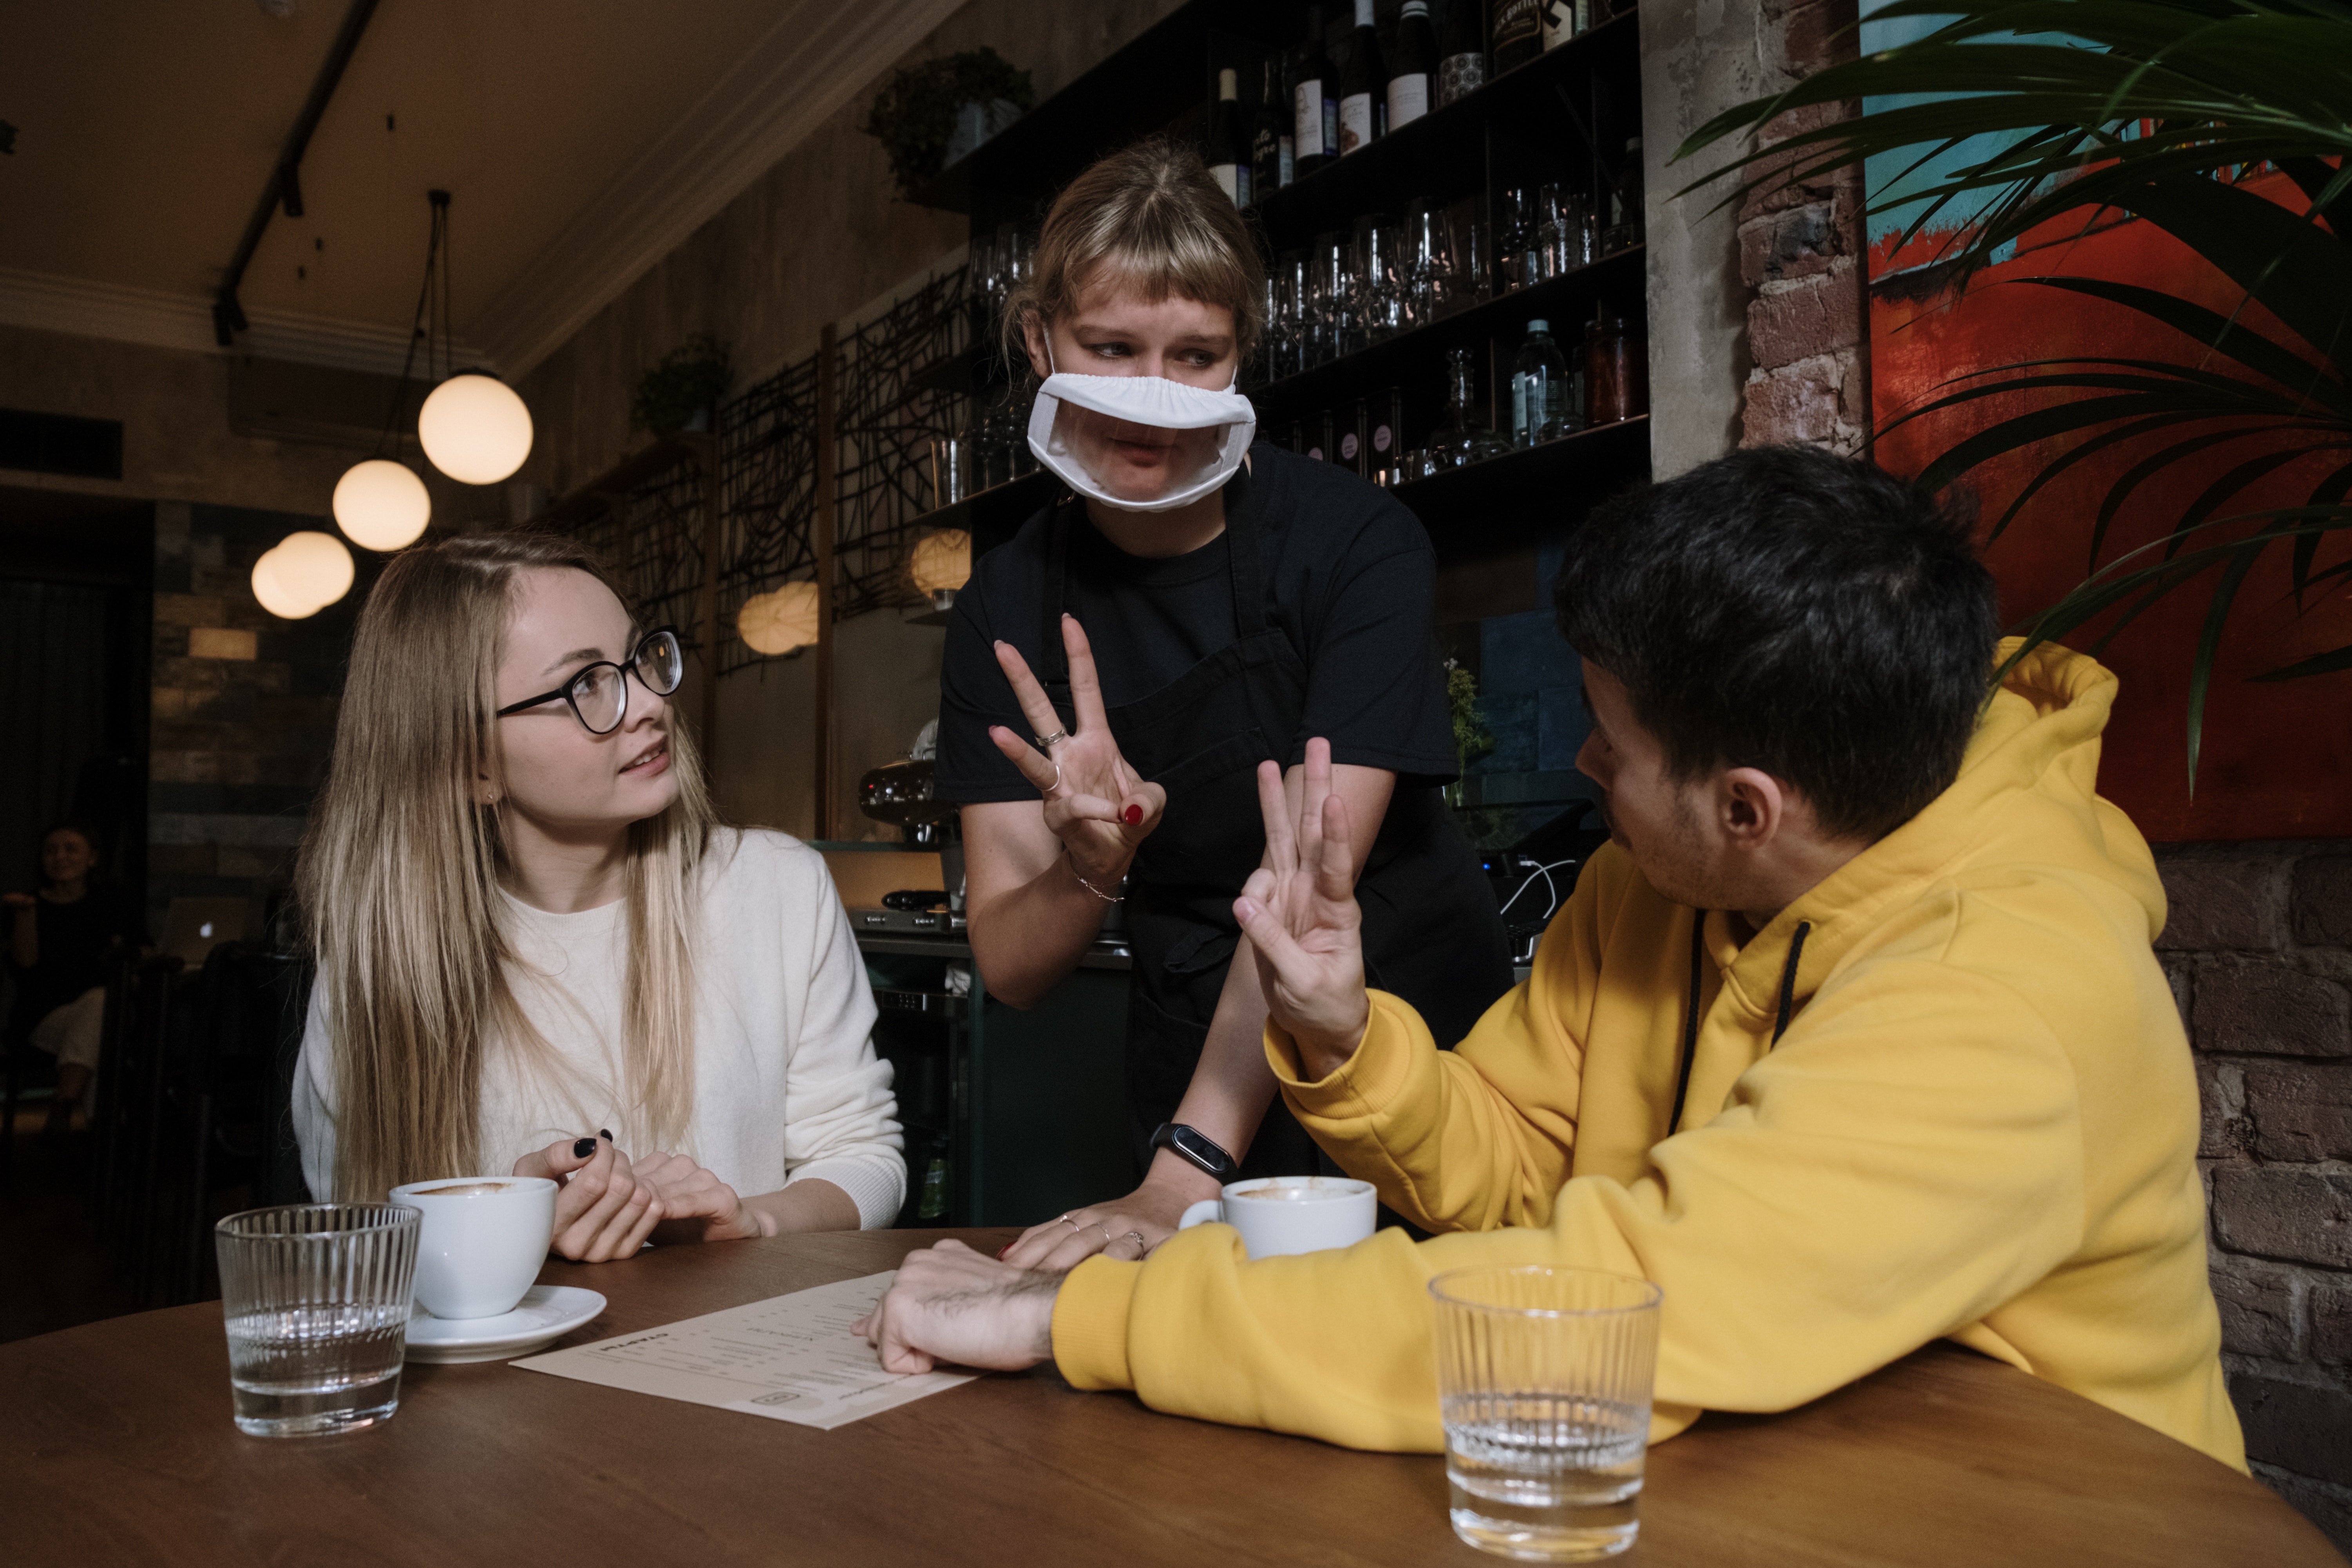 Image shows a woman in a coffee shop wearing a transparent mask signing to two customers at the tables